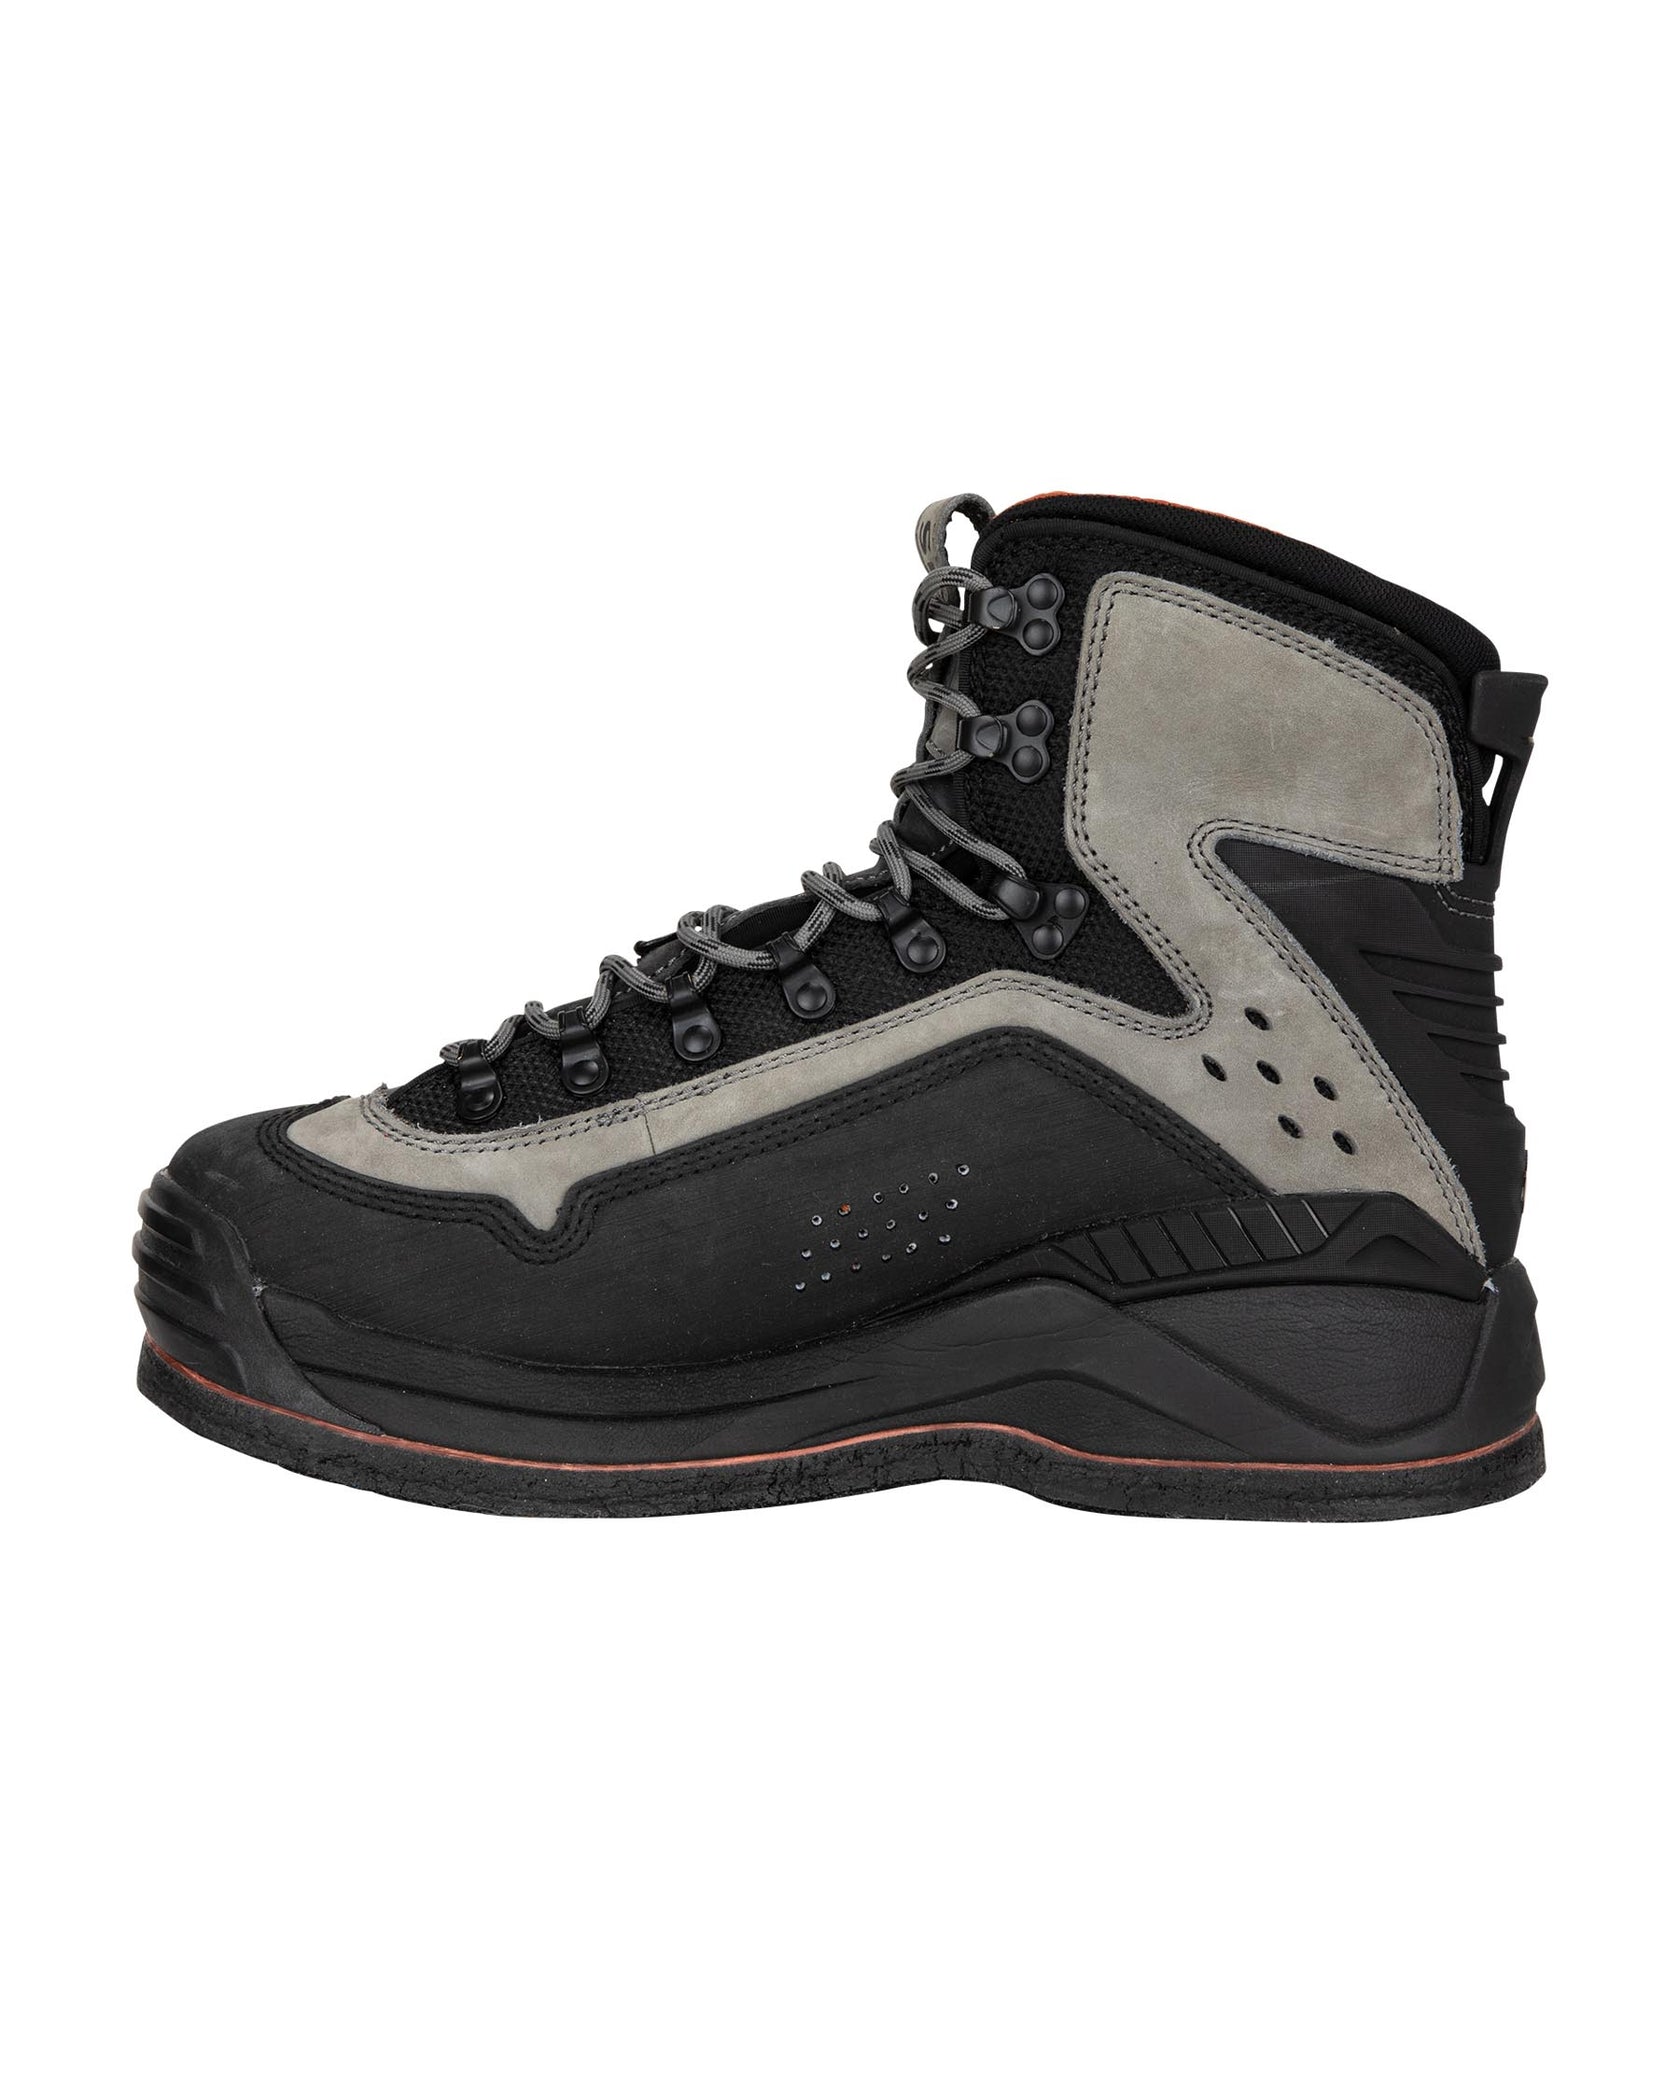 SIMMS G3 GUIDE FELT SOLE WADING BOOT